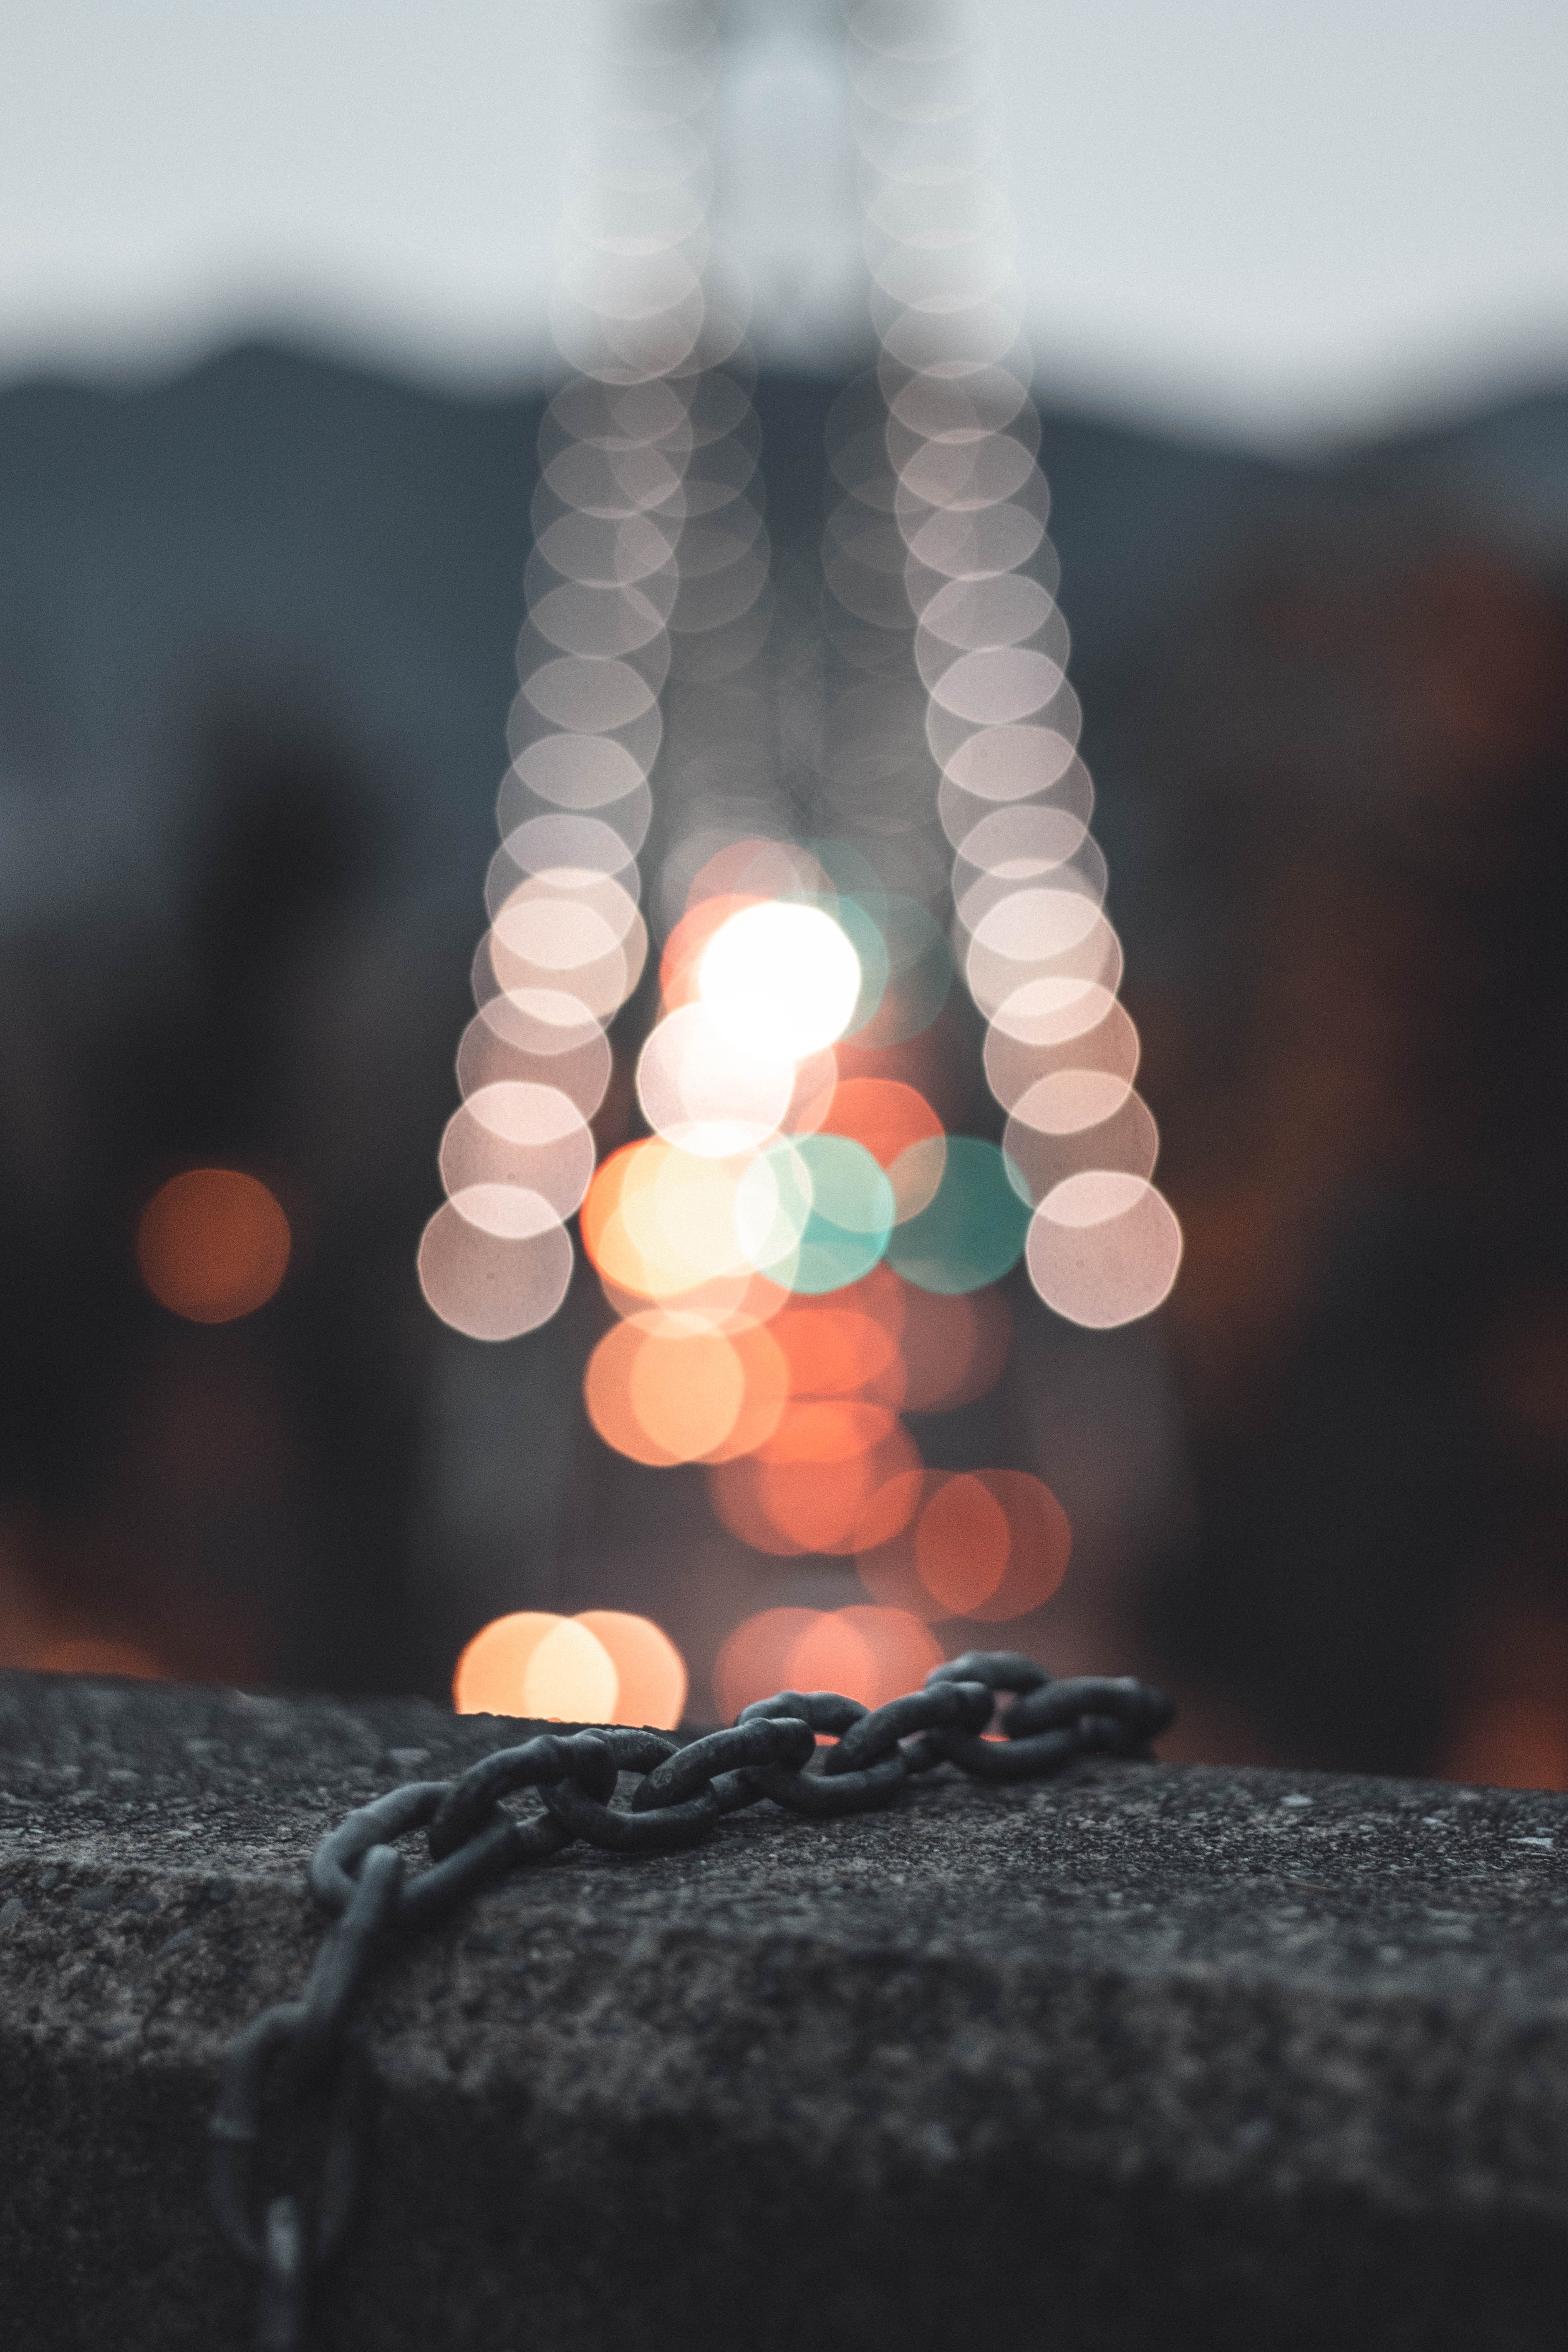 97904 Screensavers and Wallpapers Chain for phone. Download lights, glare, miscellanea, miscellaneous, blur, smooth, bokeh, boquet, chain pictures for free